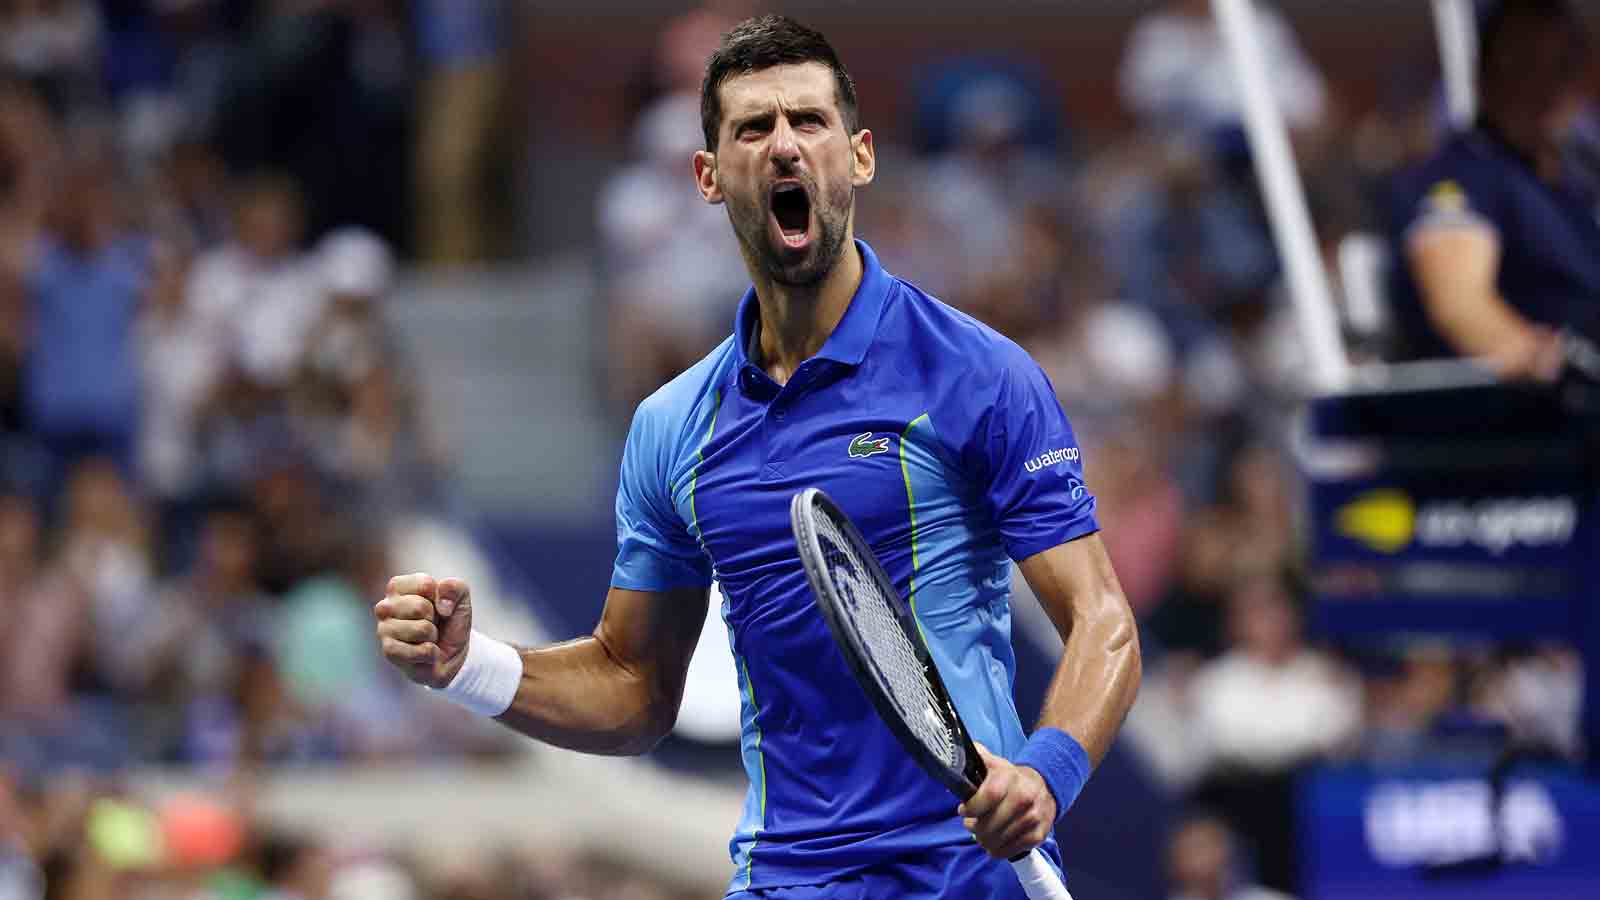 Novak Djokovic has the record for the most tiebreaks won in a